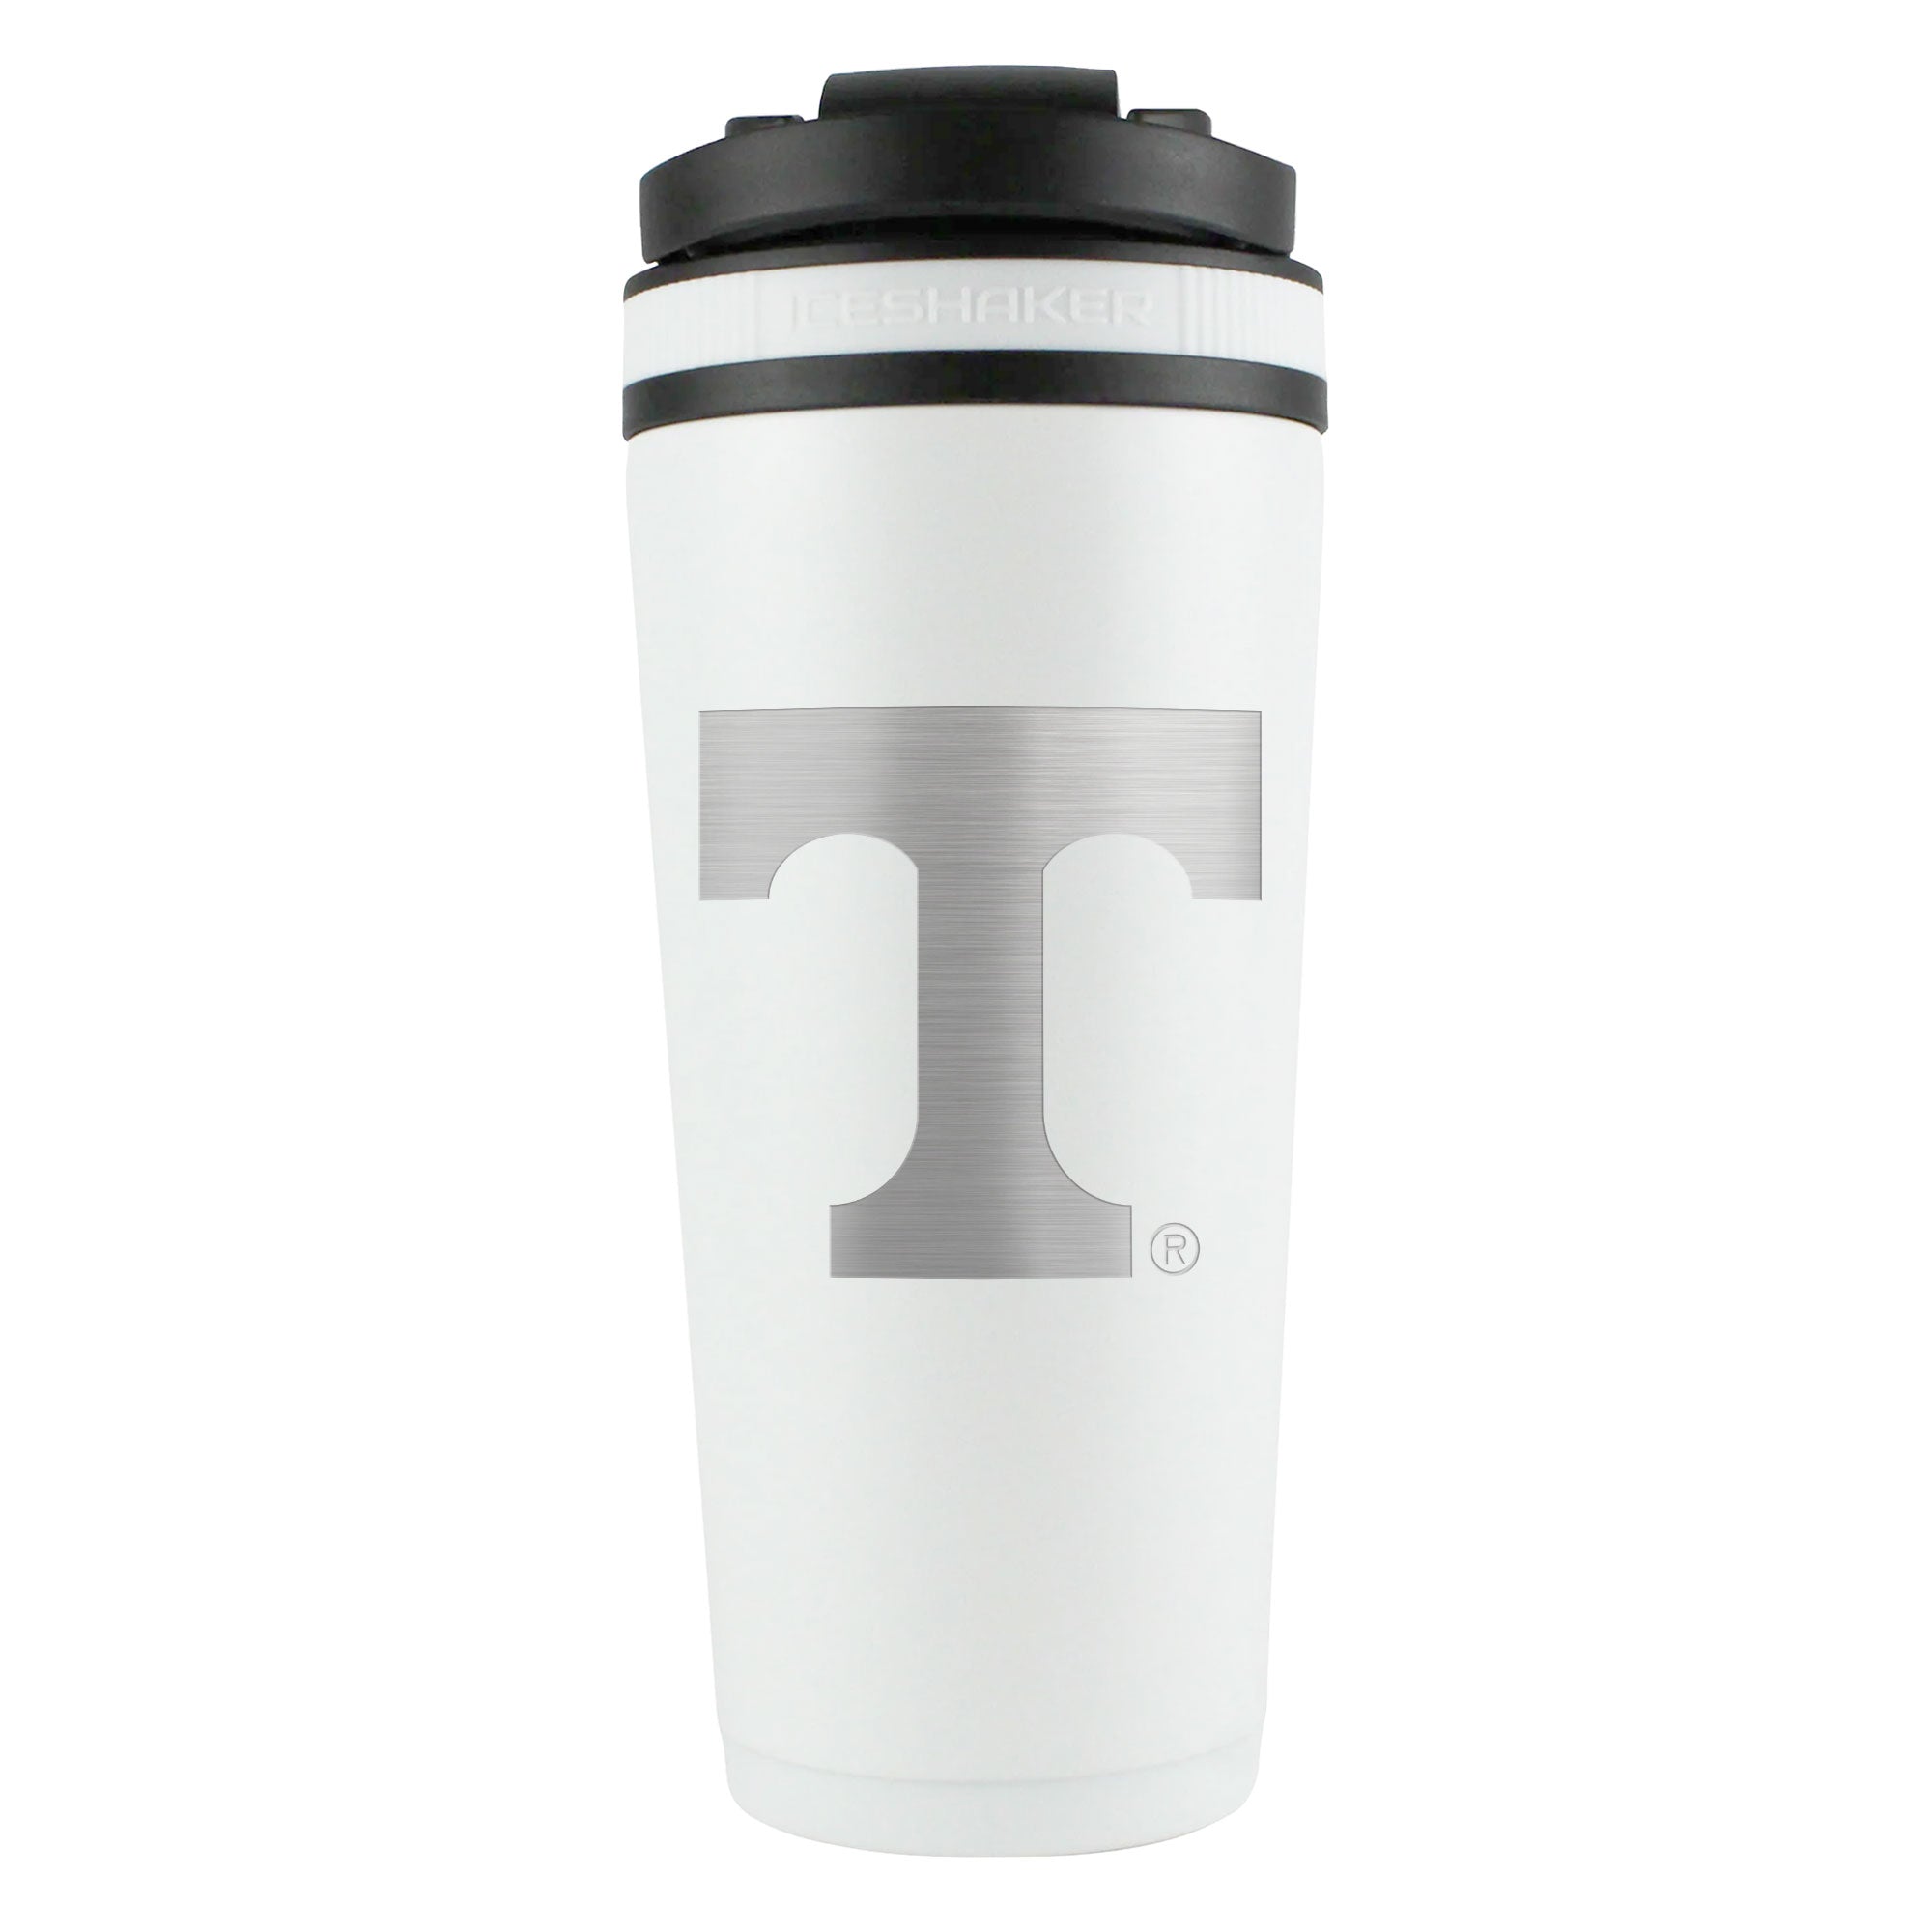 Officially Licensed University of Tennessee 26oz Ice Shaker - White